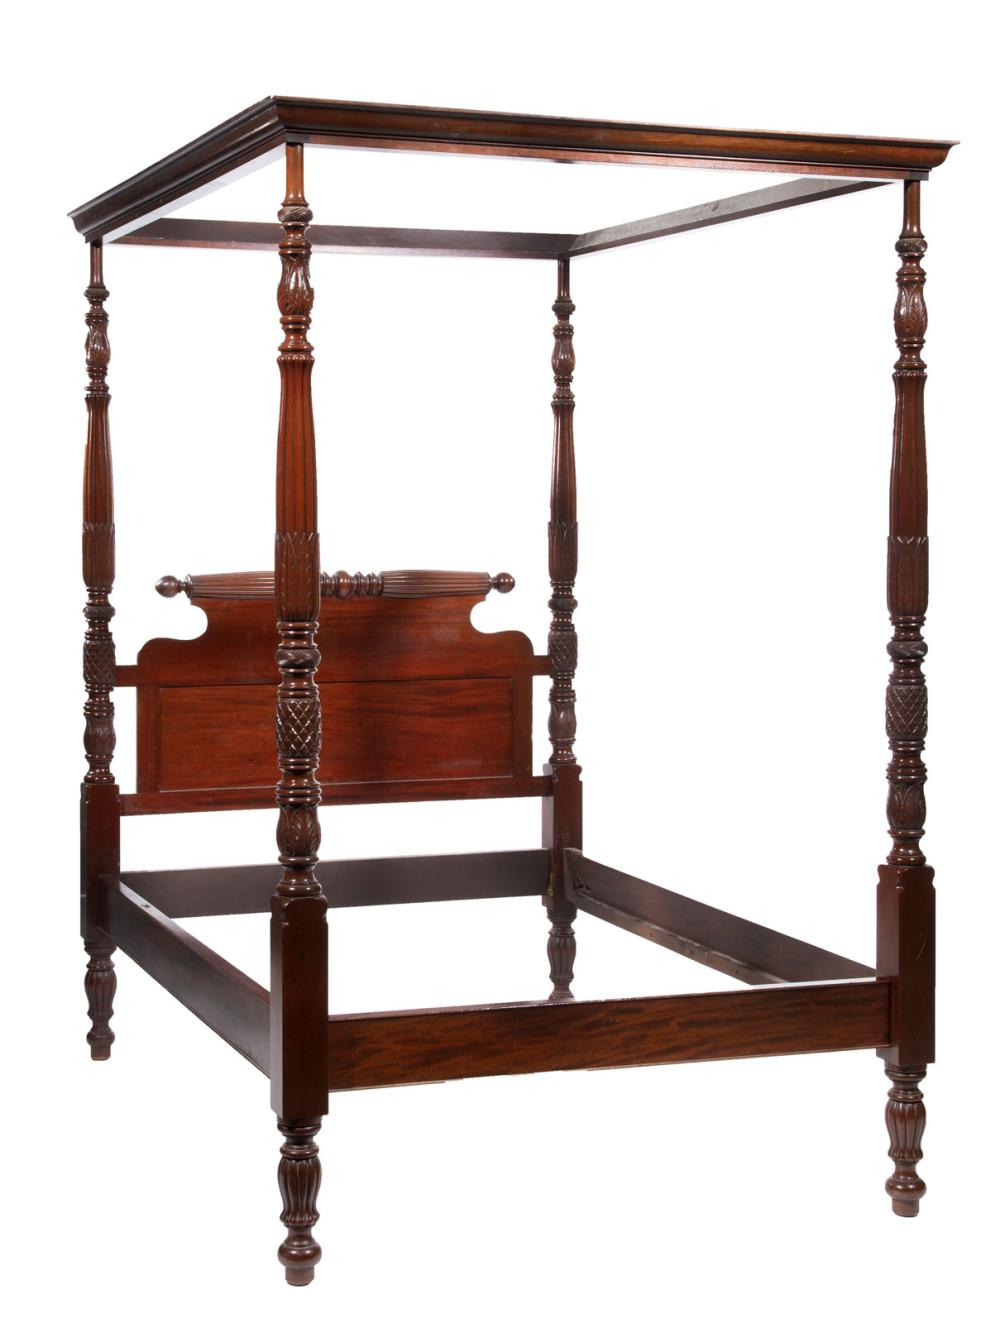 CLASSICAL-STYLE CARVED MAHOGANY